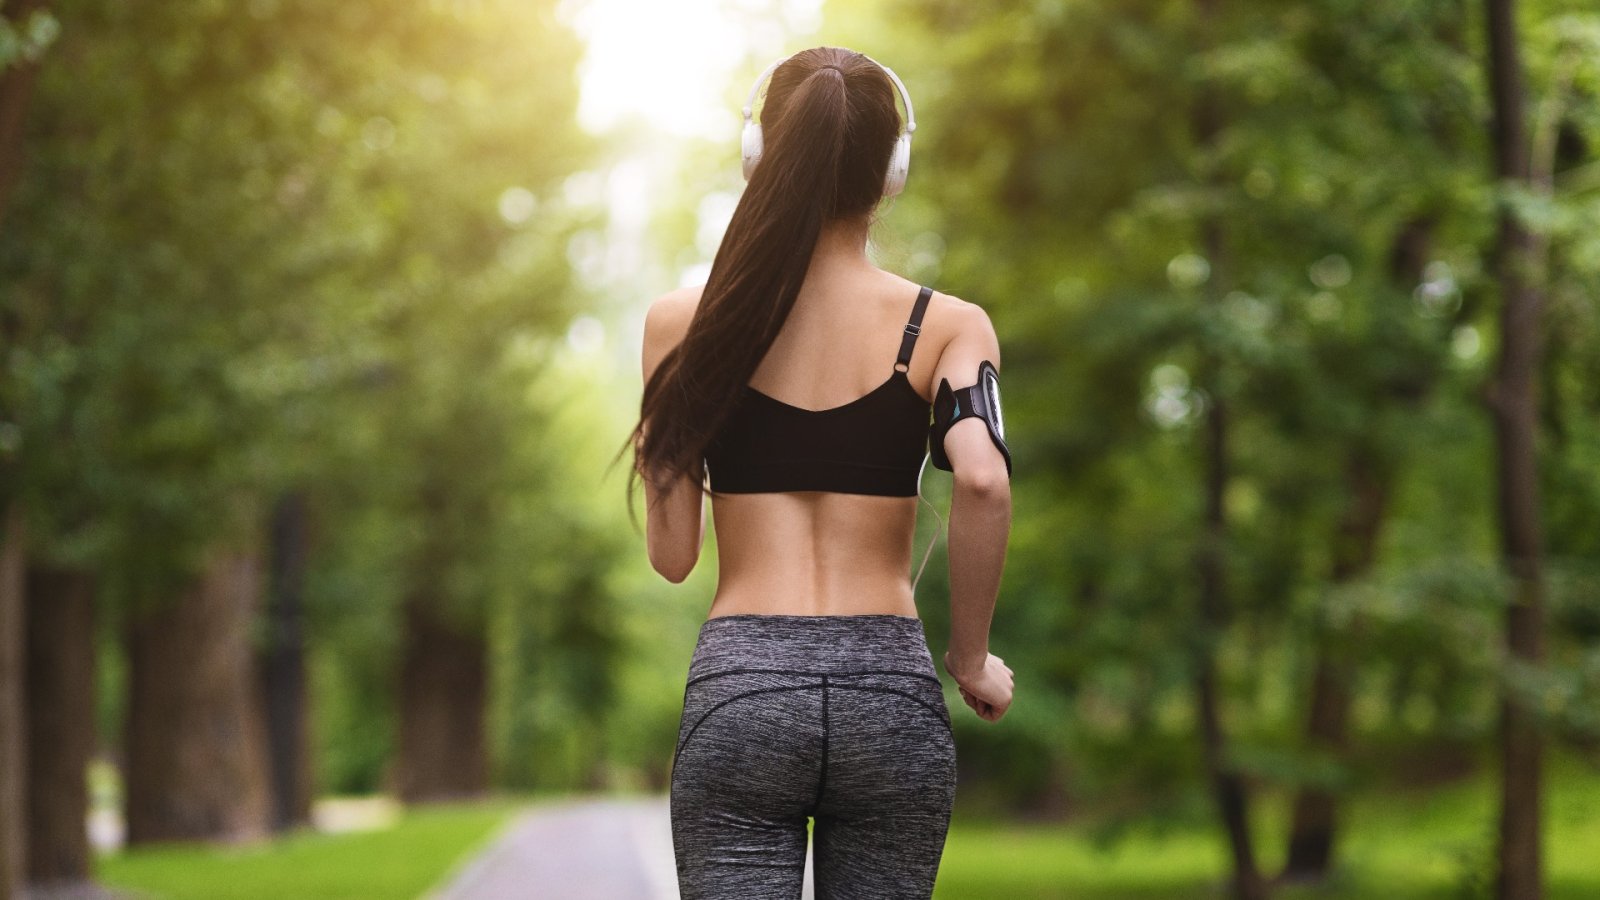 Is running backward more effective for your health and burning calories?